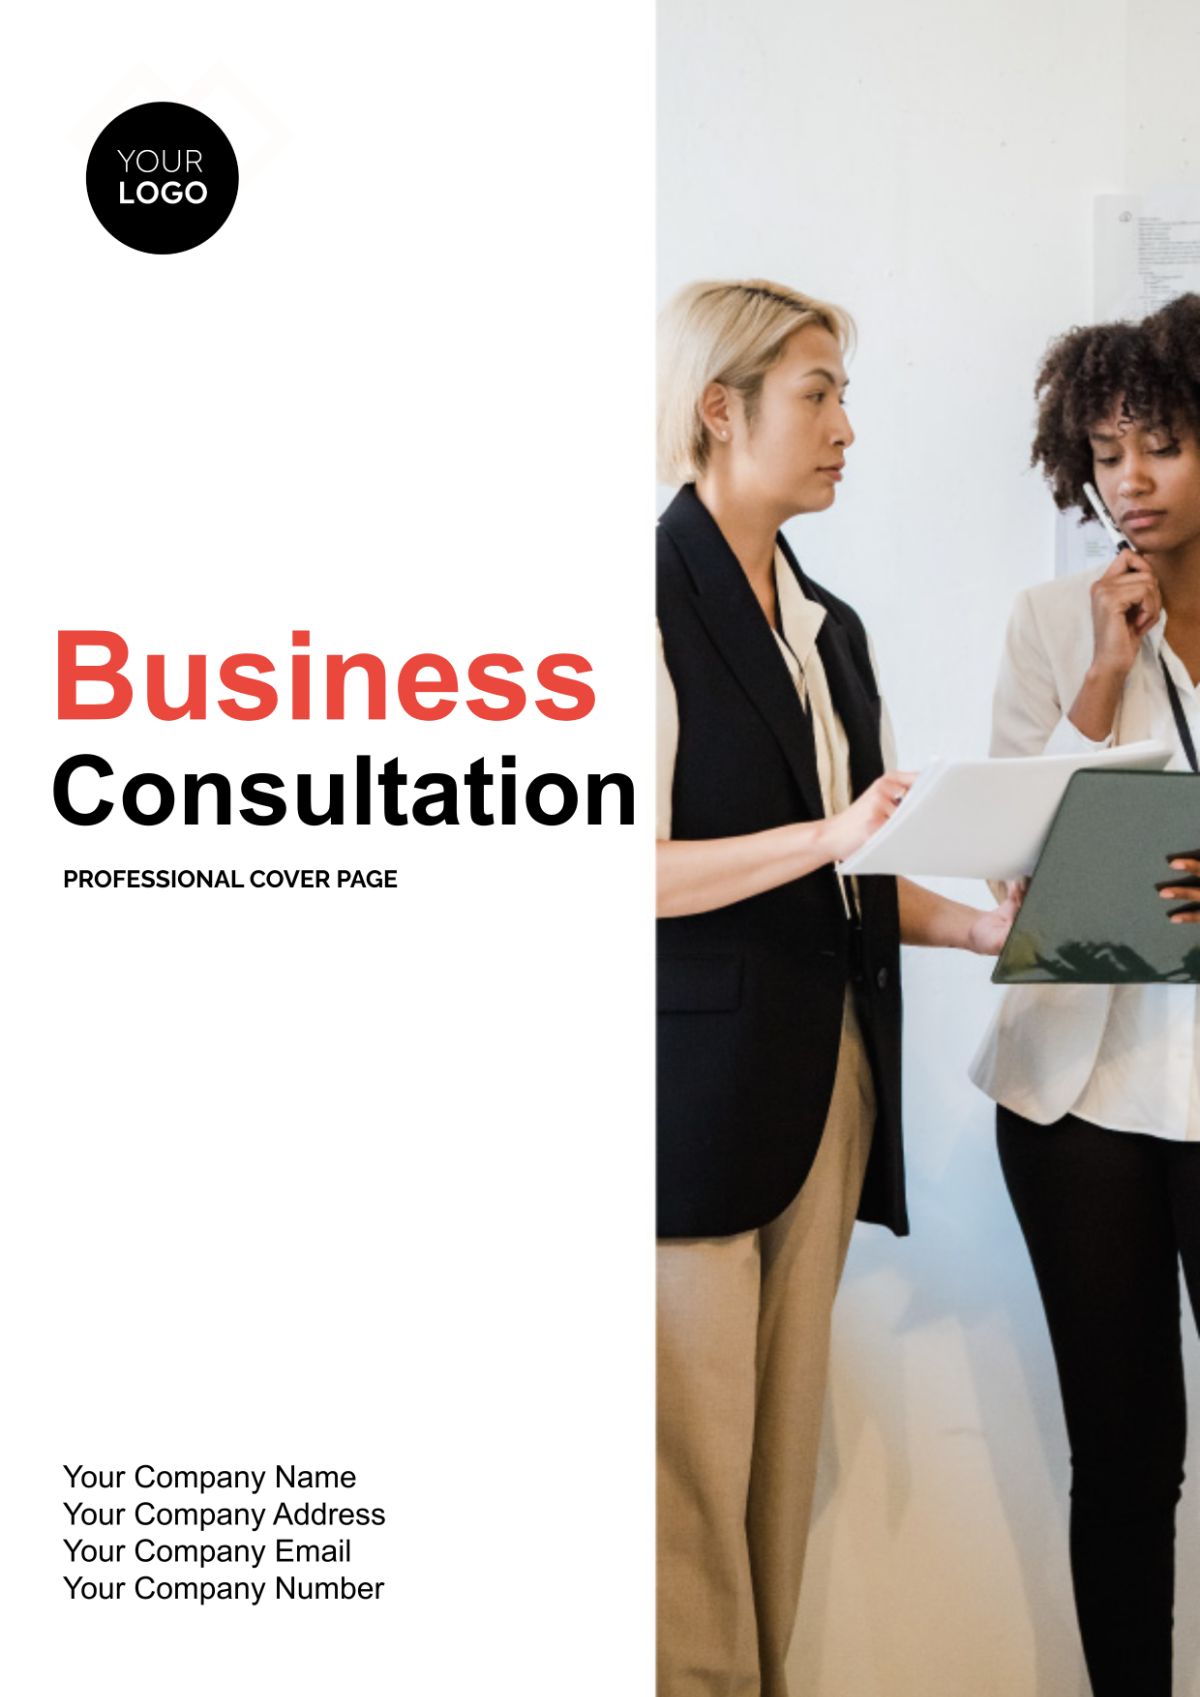 Business Consultation Professional Cover Page